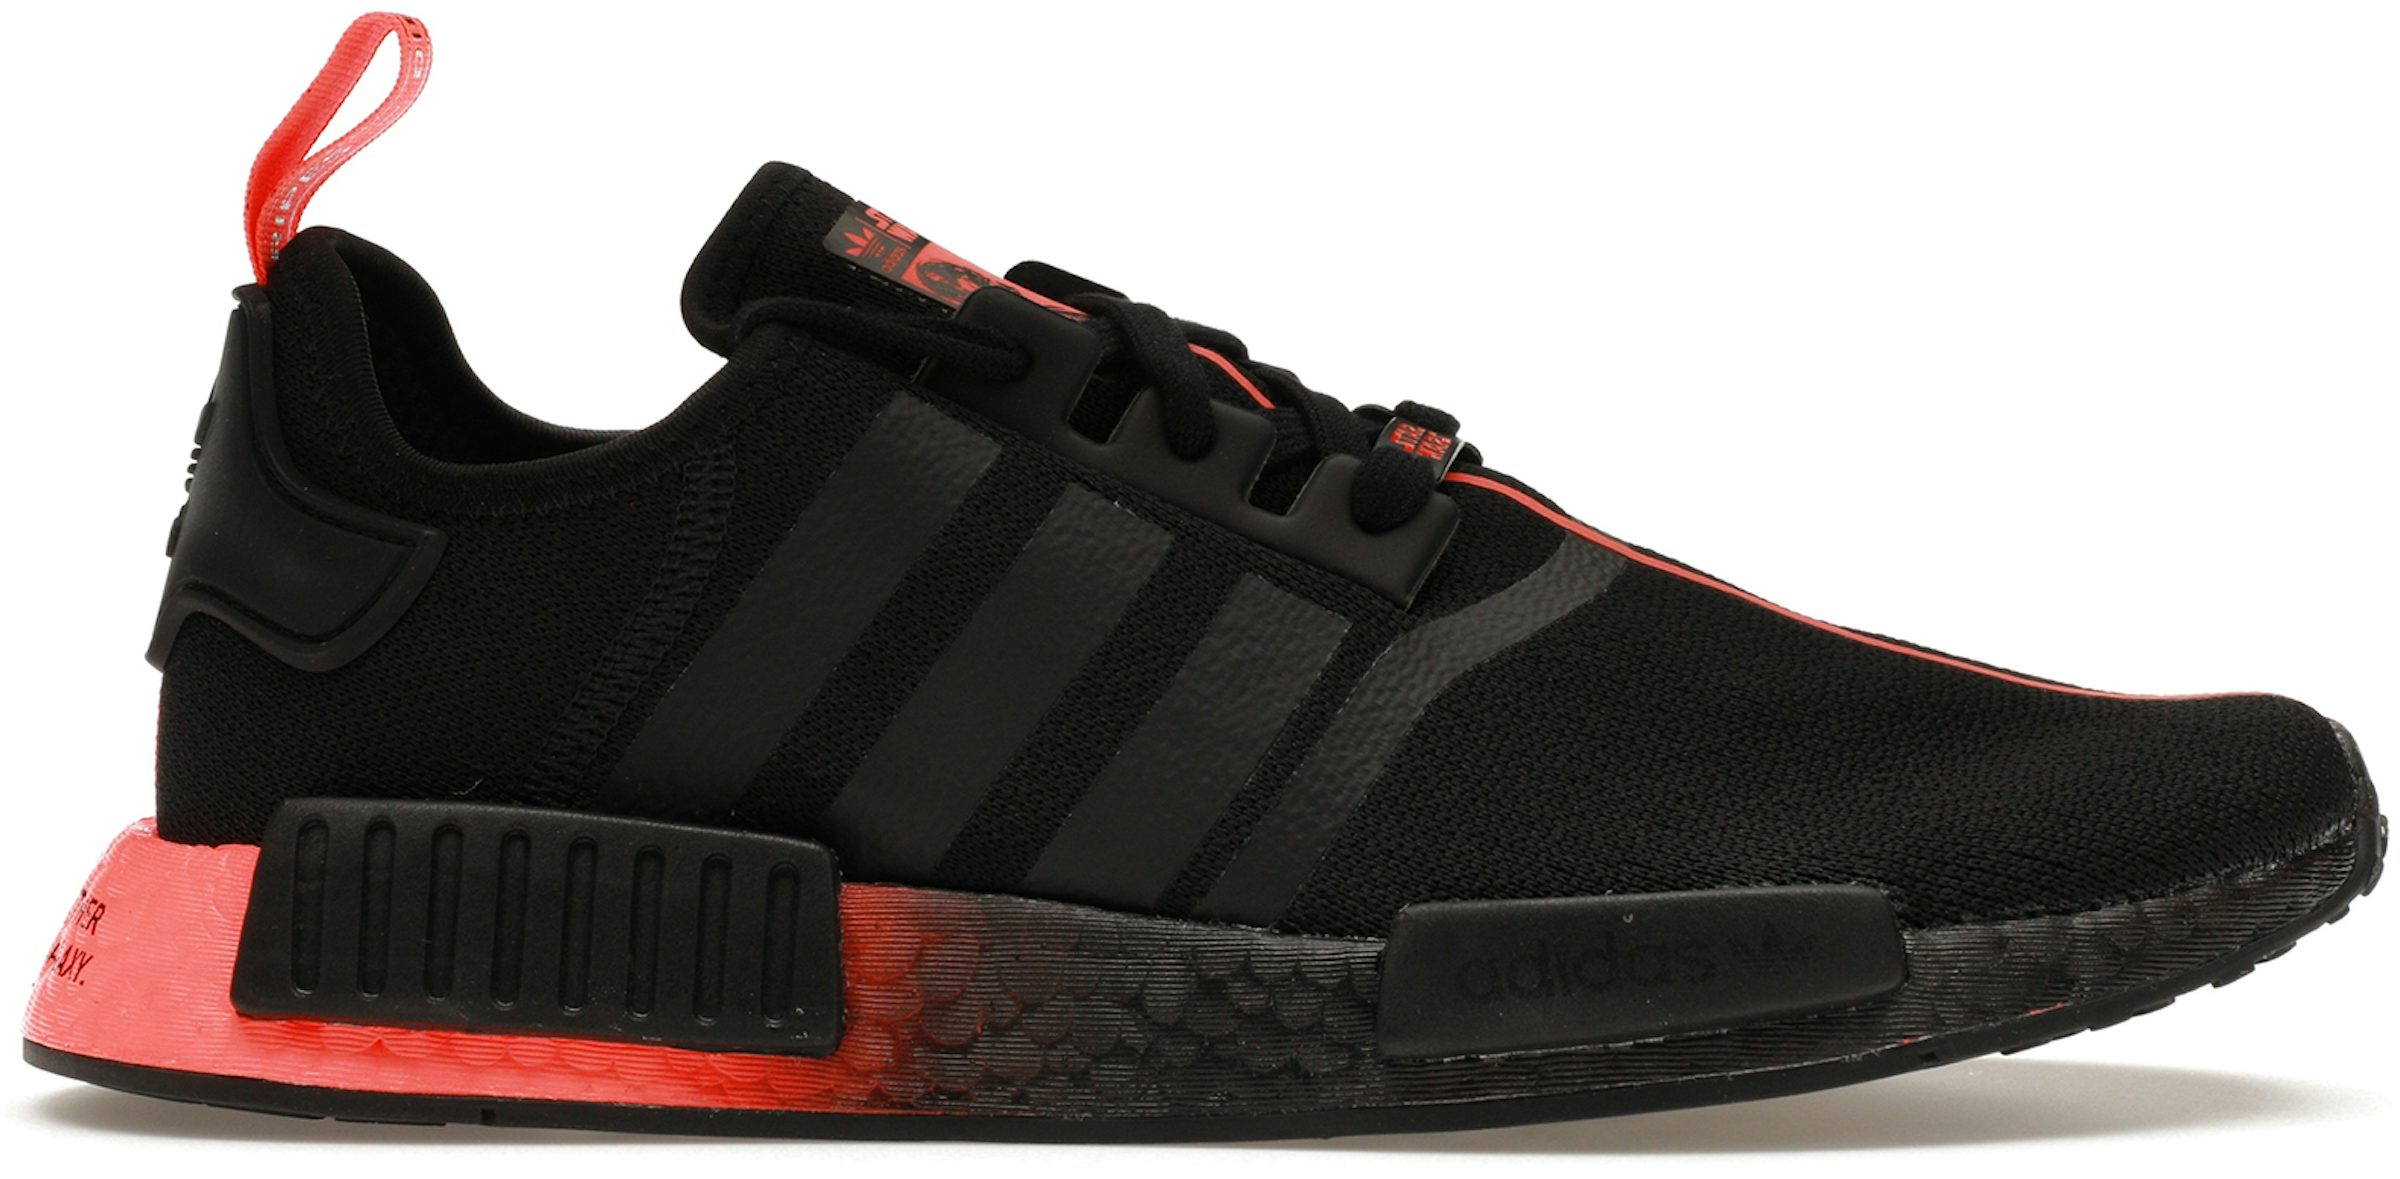 Adidas Nmd XR1 BY9924 Black Solar Red Boost Running Shoes Sneakers Men -  beyond exchange